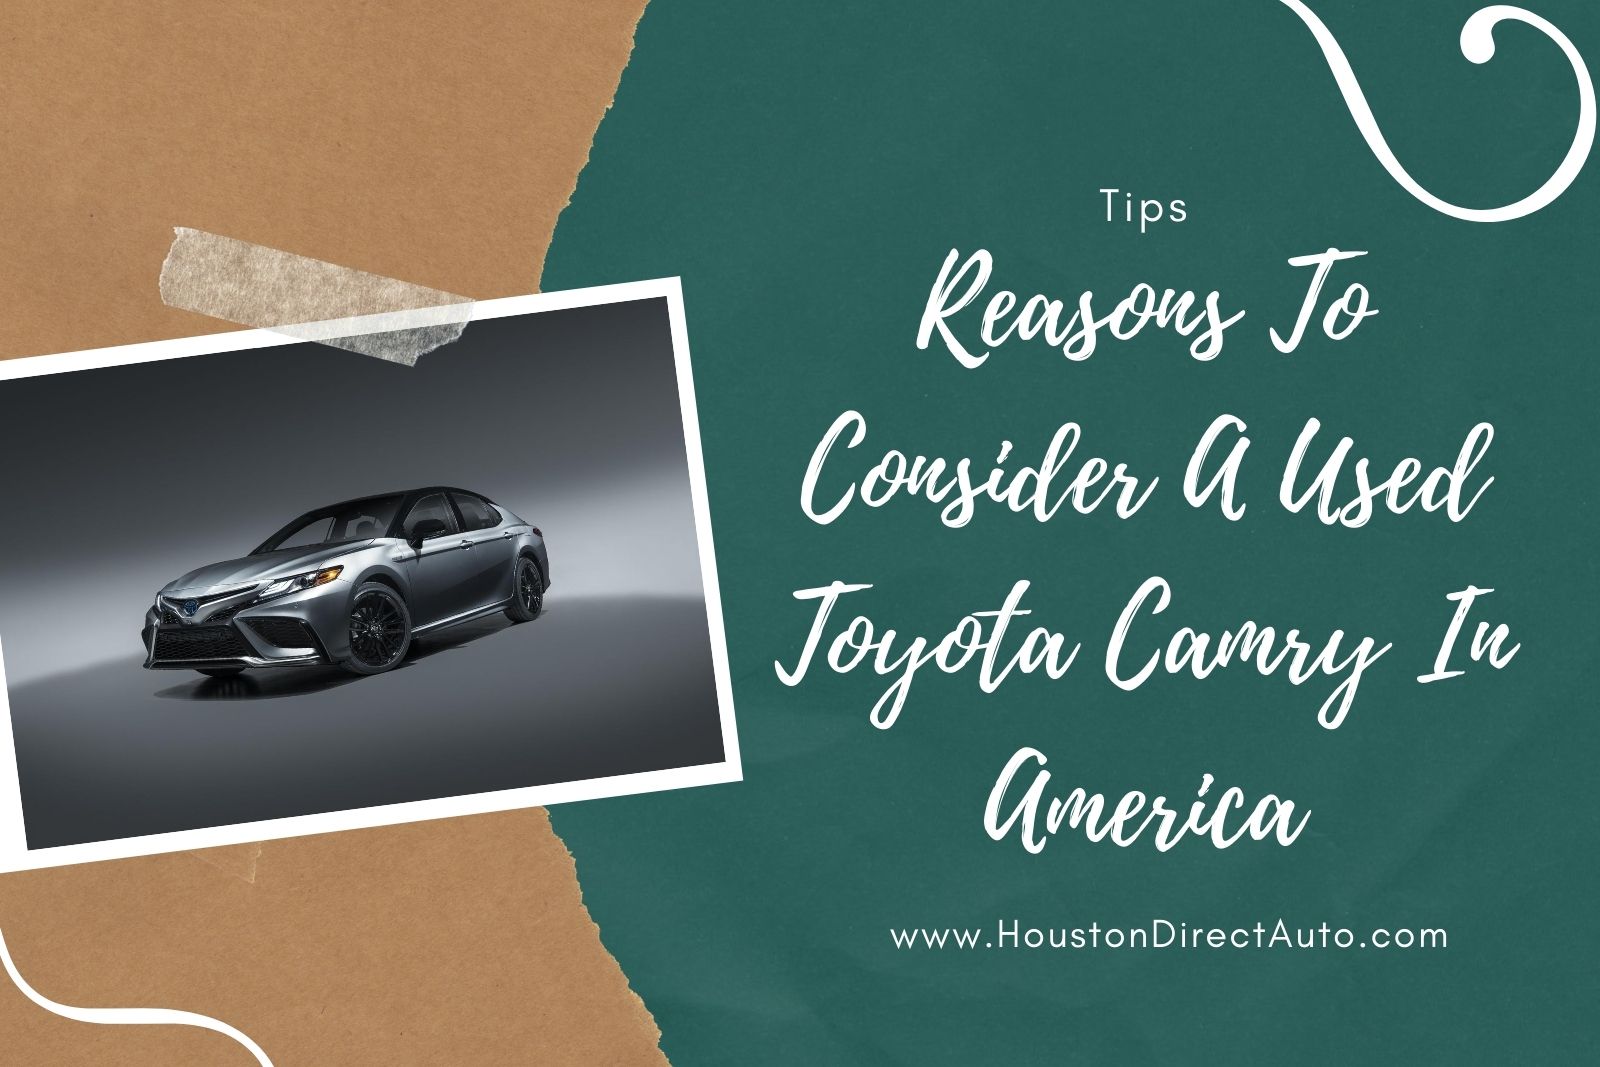 Reasons To Consider A Used Toyota Camry In America